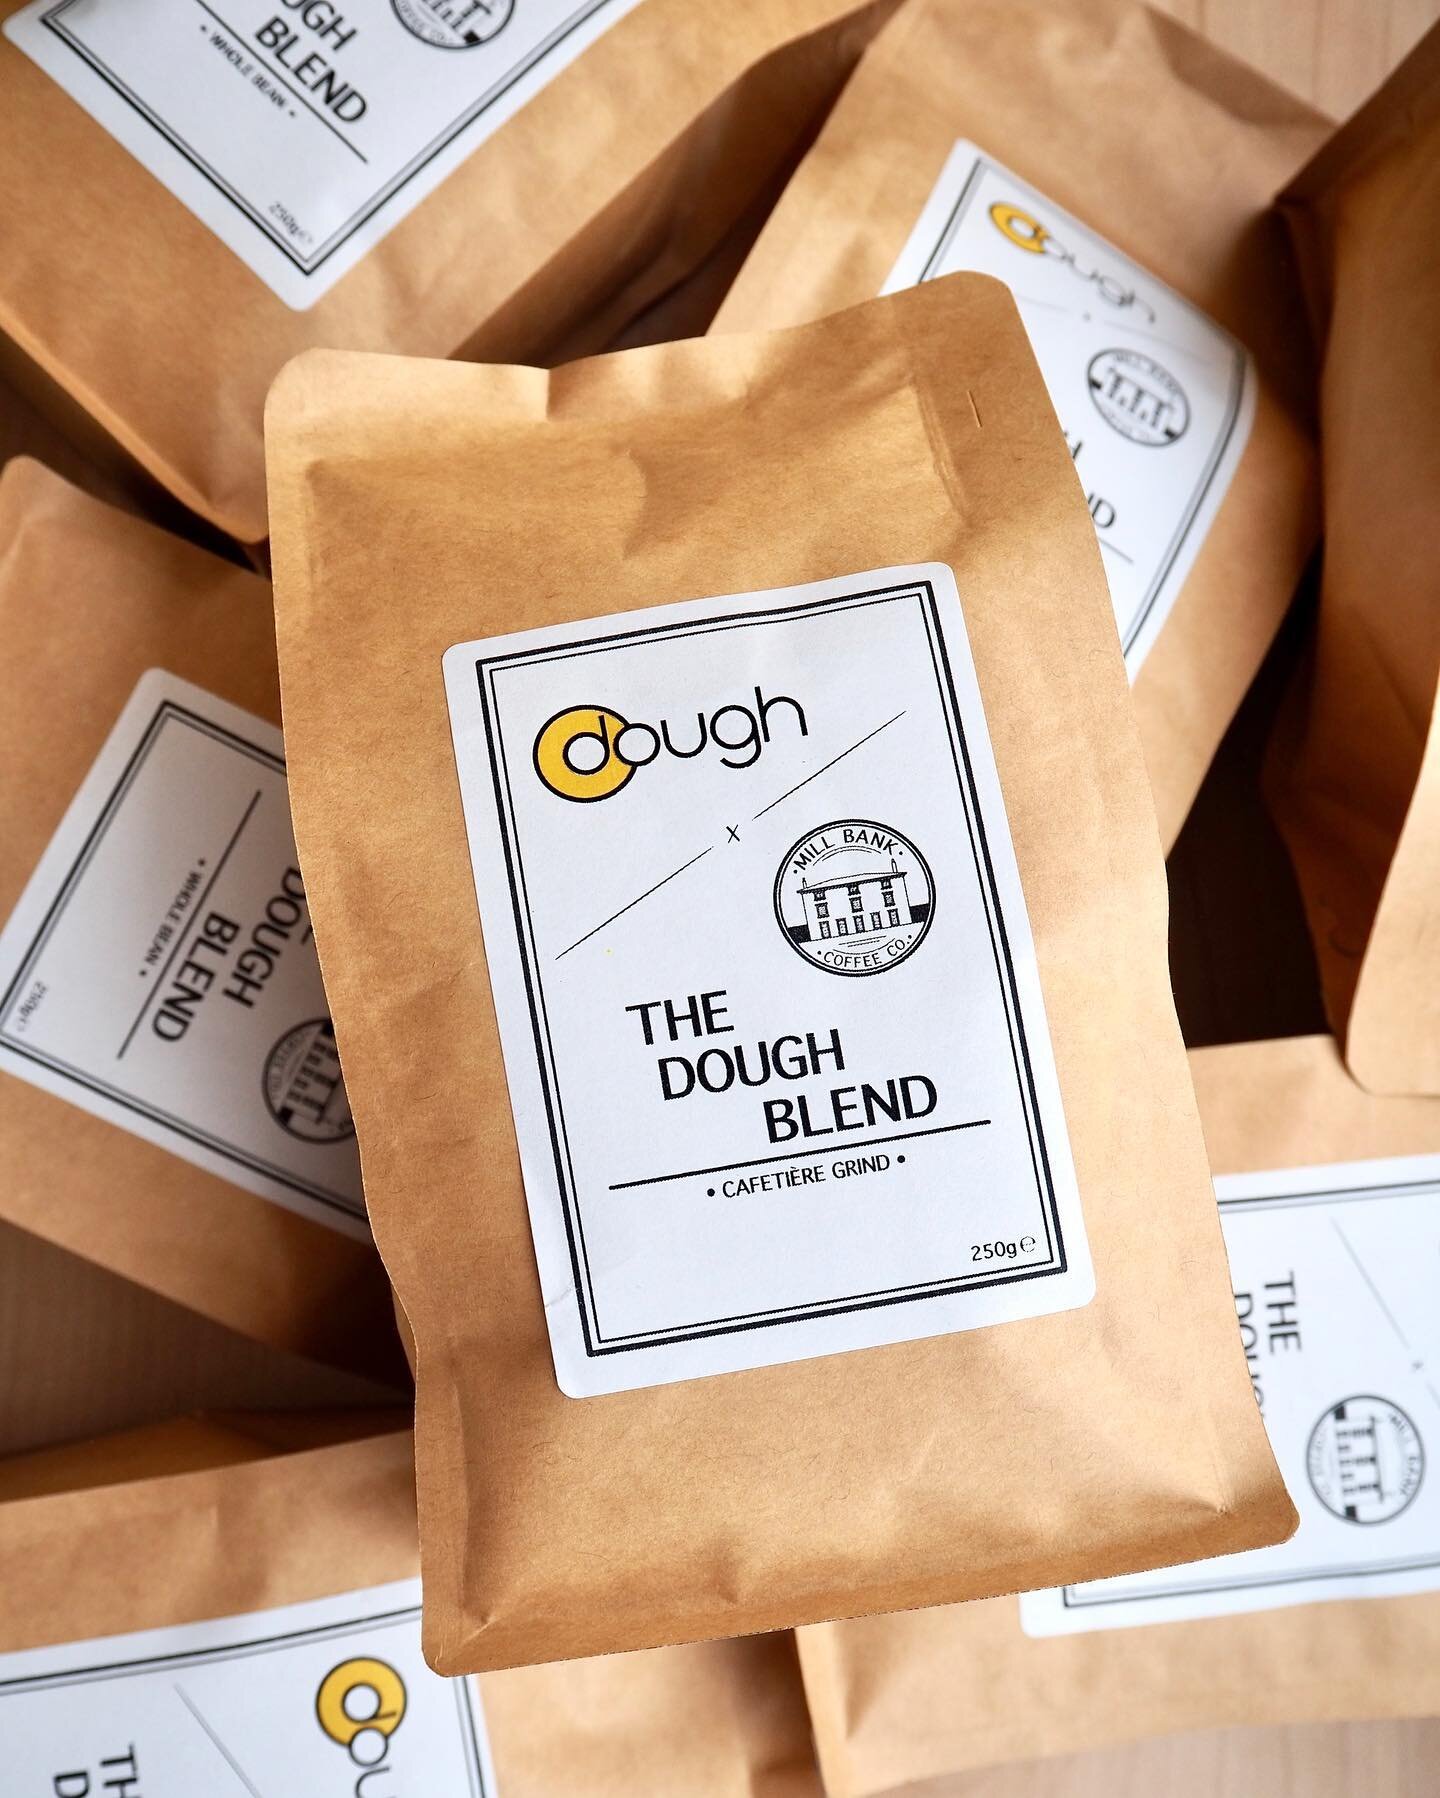 The taste of Dough at home by @Millbankcoffee ☕⁣
⁣
Available to purchase at Dough throughout the week! ⁣
⁣
#dough #doughhereford #coffee #coffeegram #smallbatch #specialitycoffee